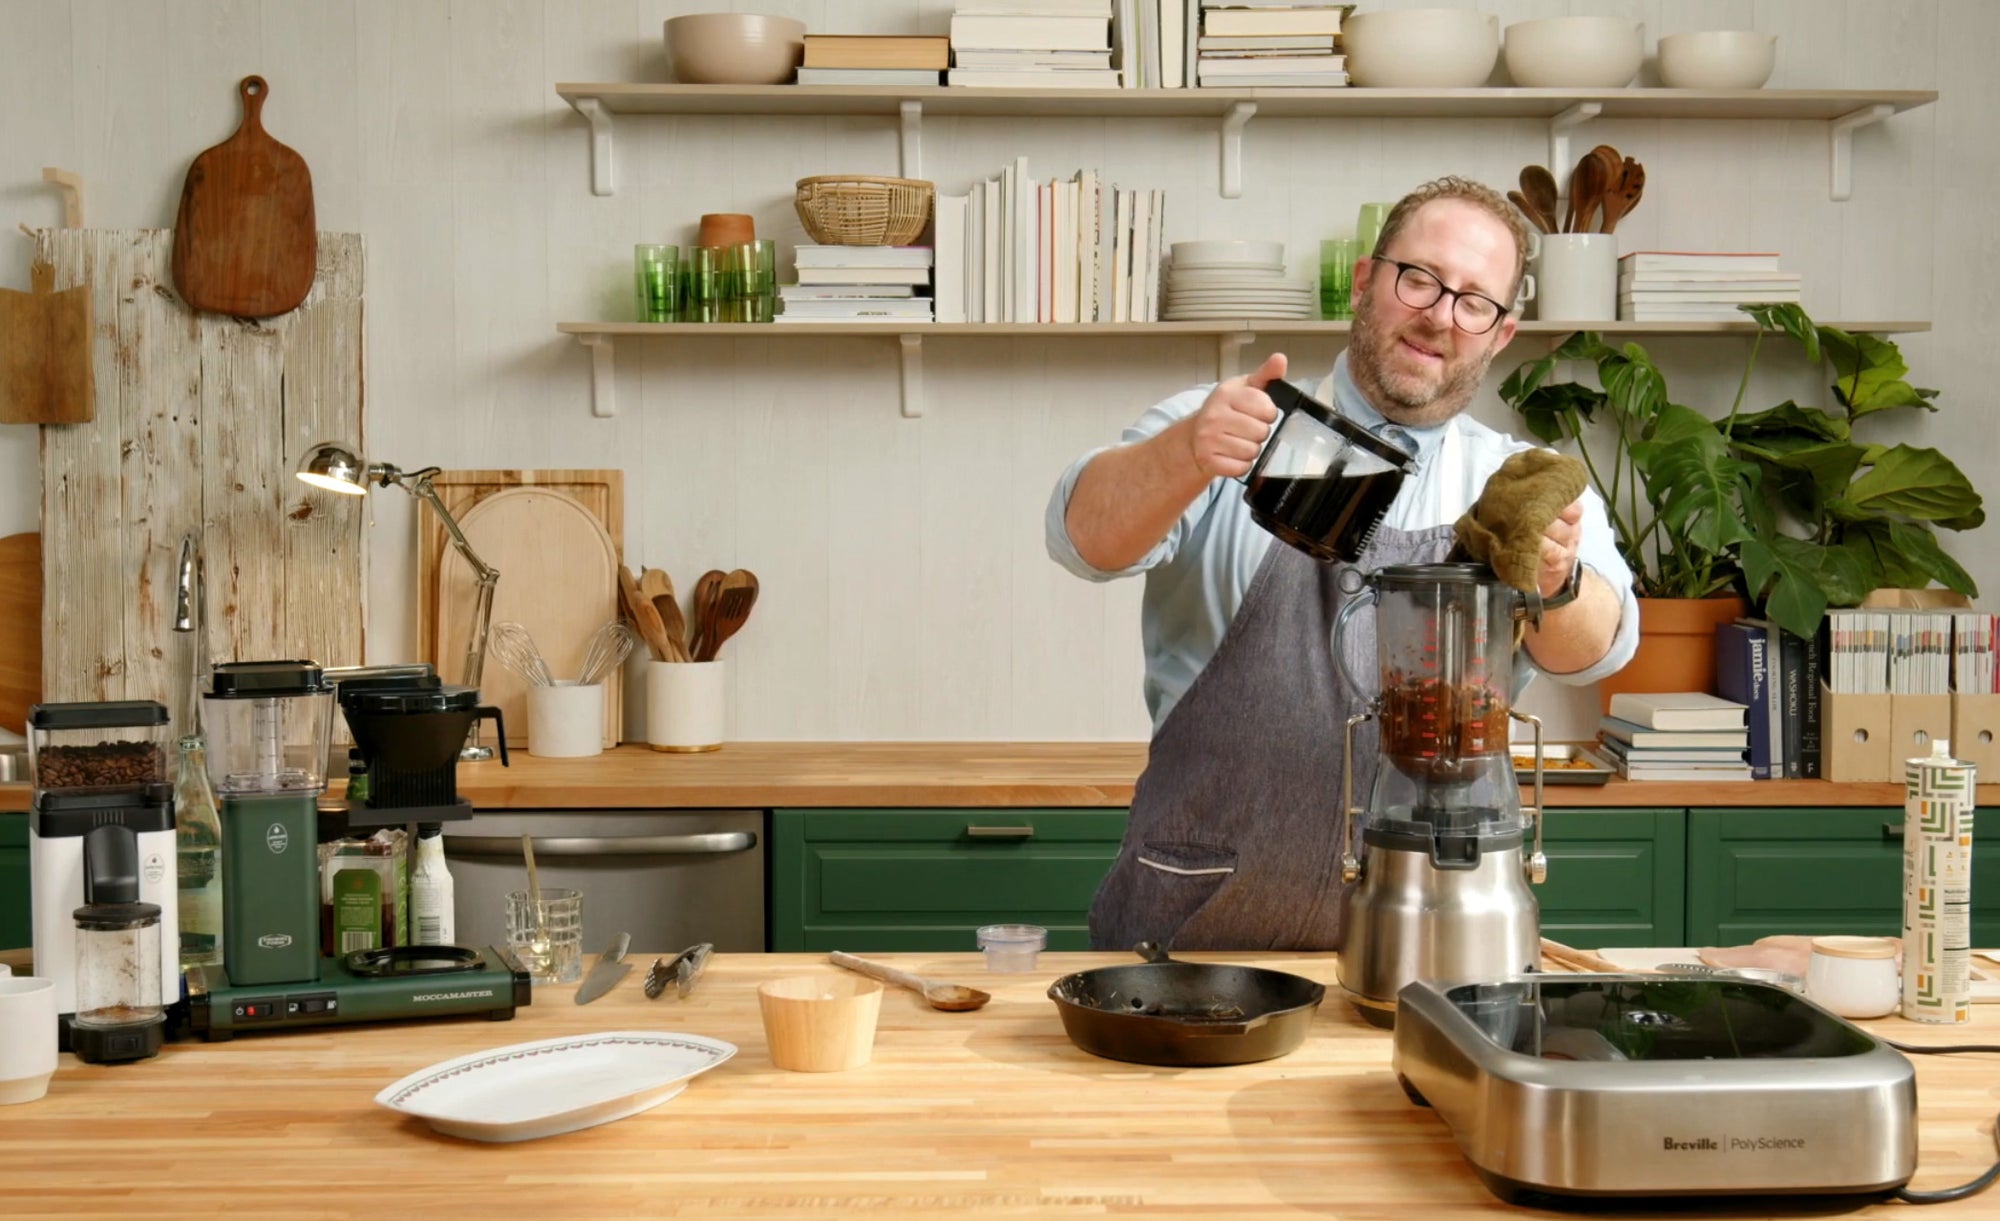 Chef Joel Gamoran stands in the Homemade kitchen, pouring coffee from a KBGV Select carafe into a blender filled with mole.